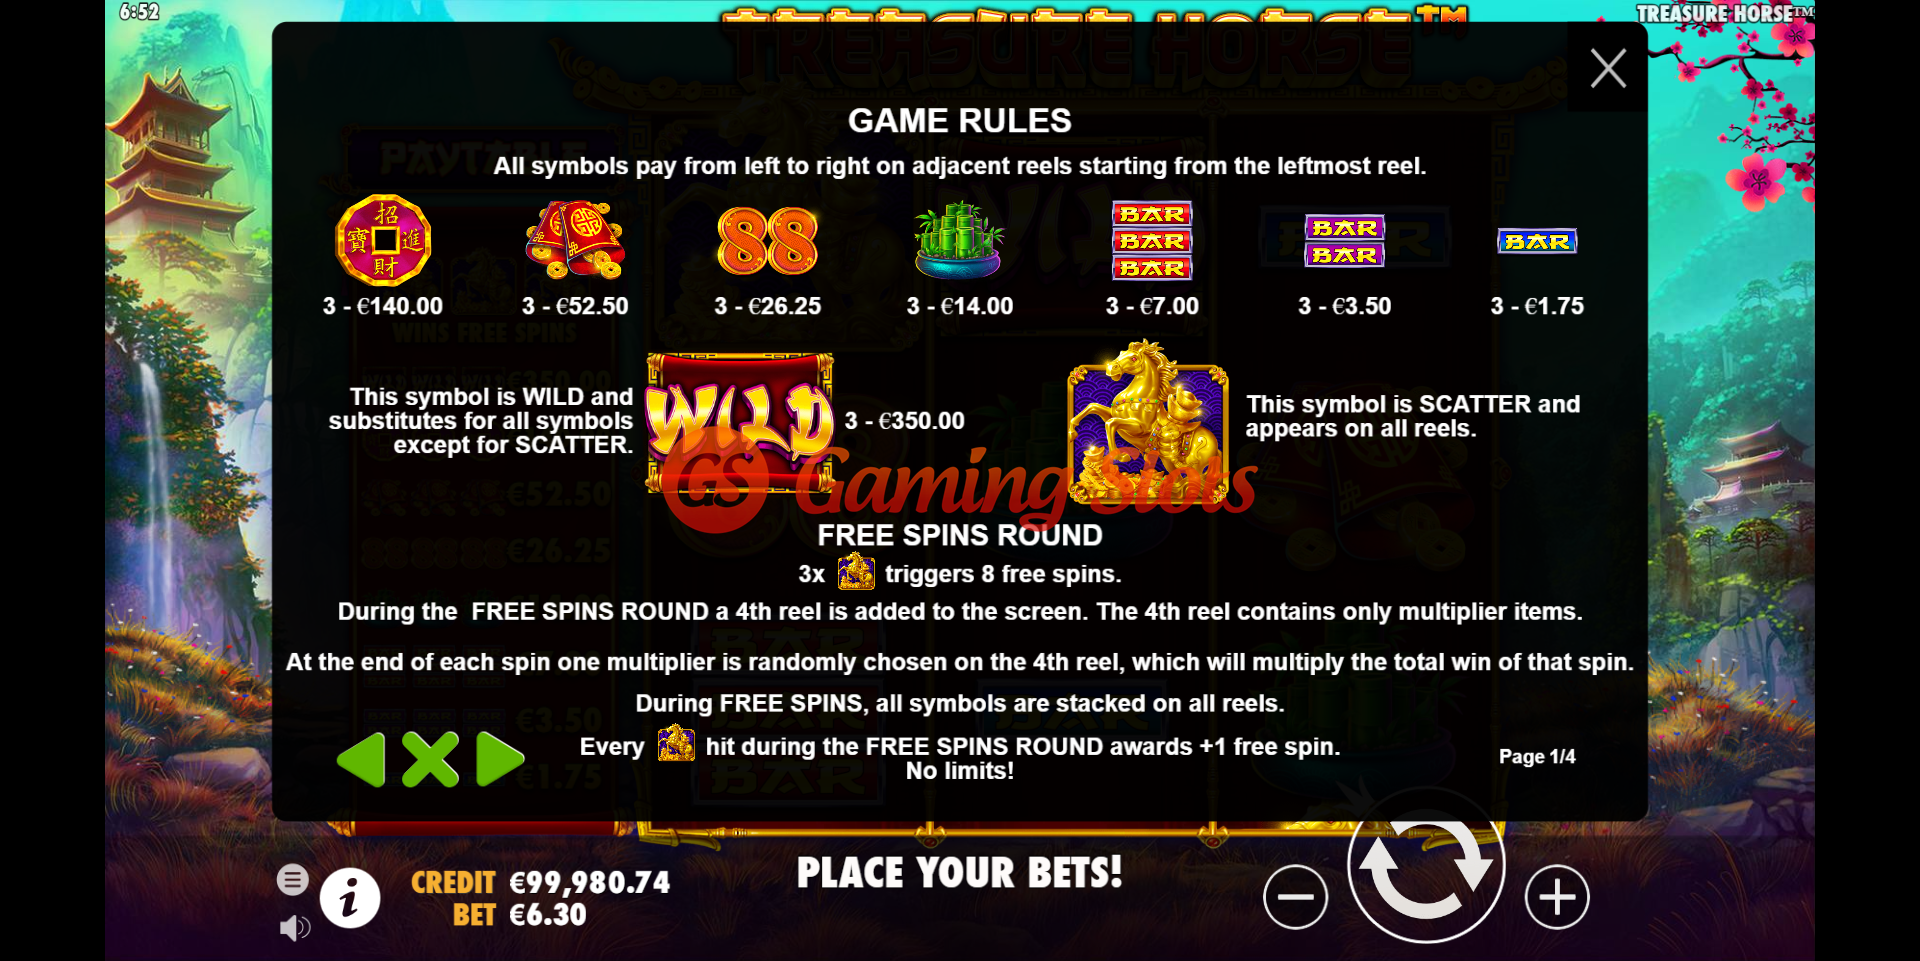 Game Rules for Treasure Horse slot from Pragmatic Play